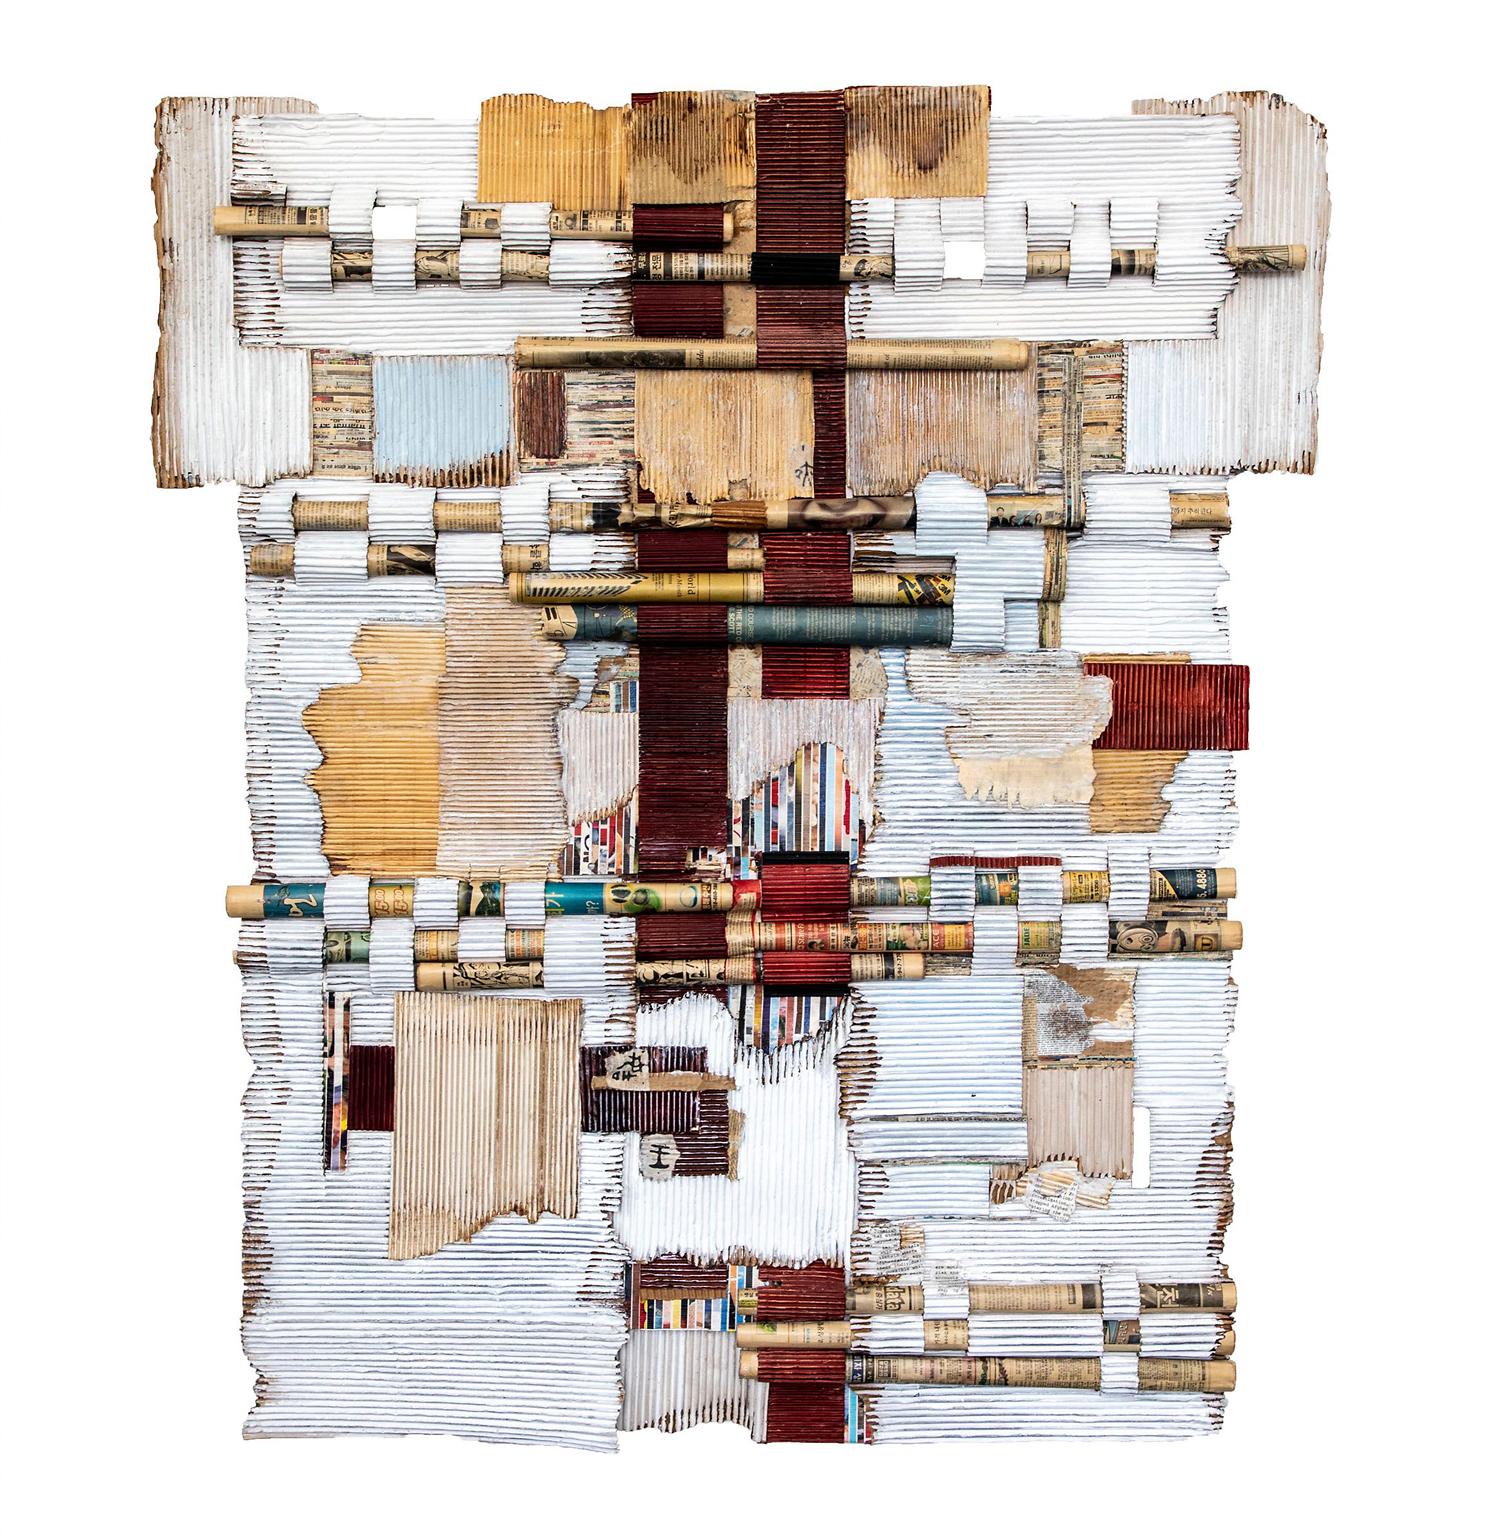 Joan Giordano Abstract Sculpture - "White Washed" Abstract Paper Wall Relief Sculpture, Mixed Media Collage